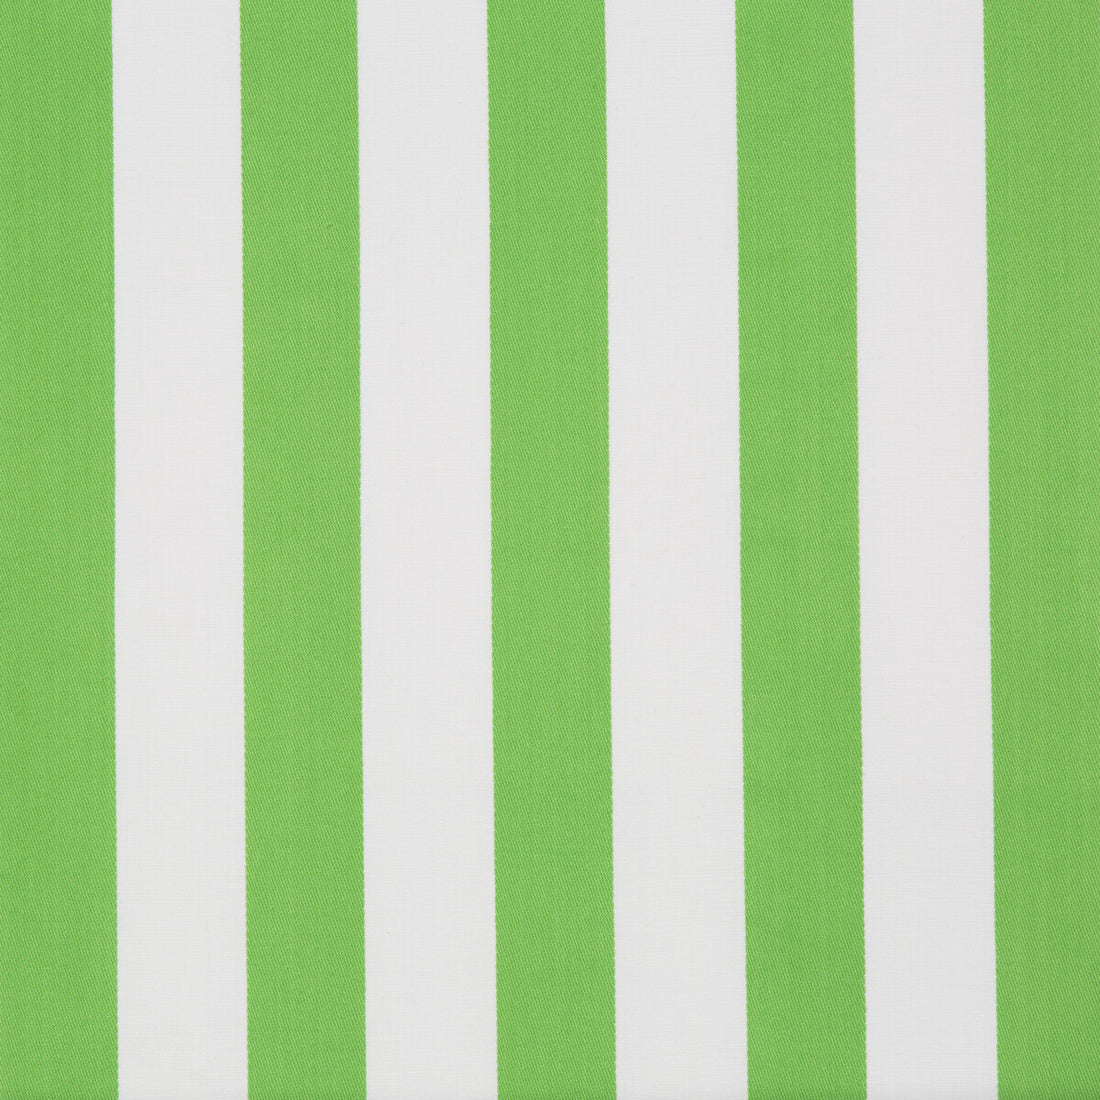 Surf Stripe fabric in palm green color - pattern 2016117.123.0 - by Lee Jofa in the Lilly Pulitzer II collection